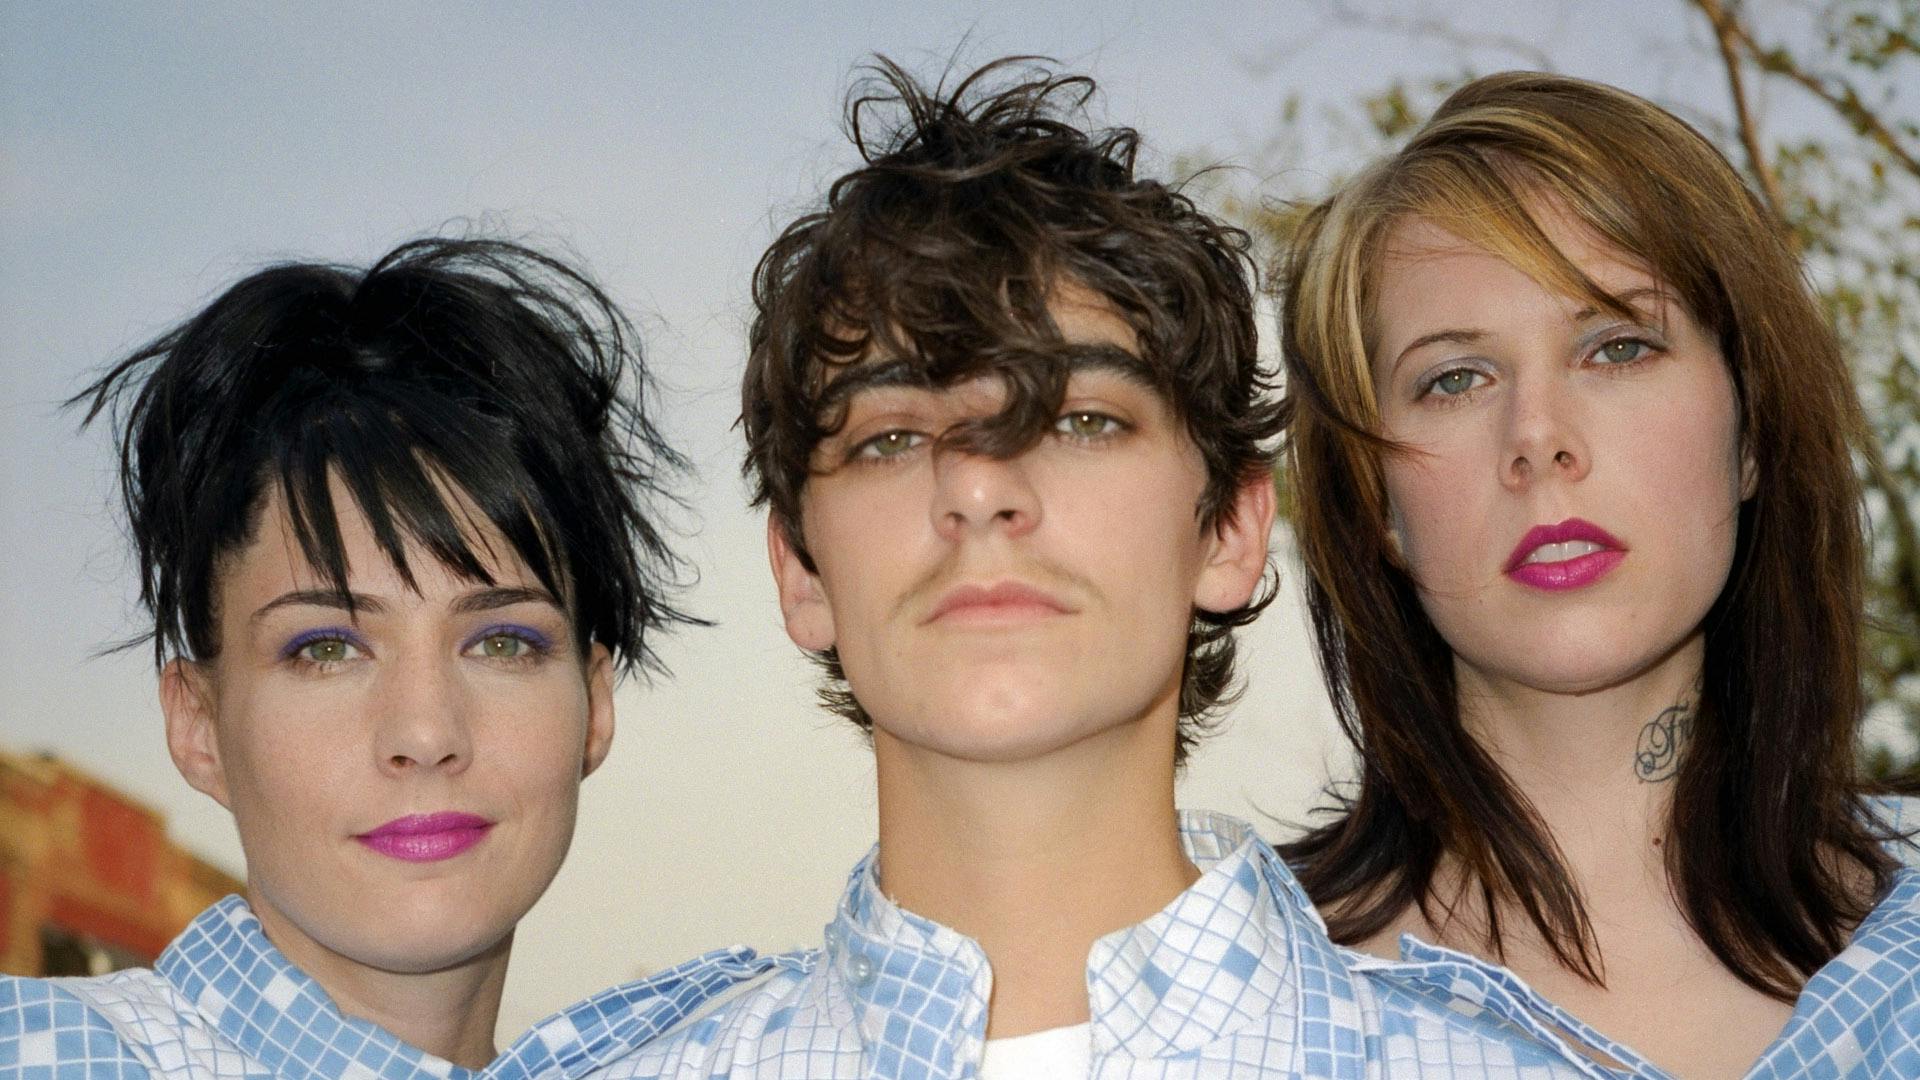 Le Tigre to reunite for the first time in 18 years